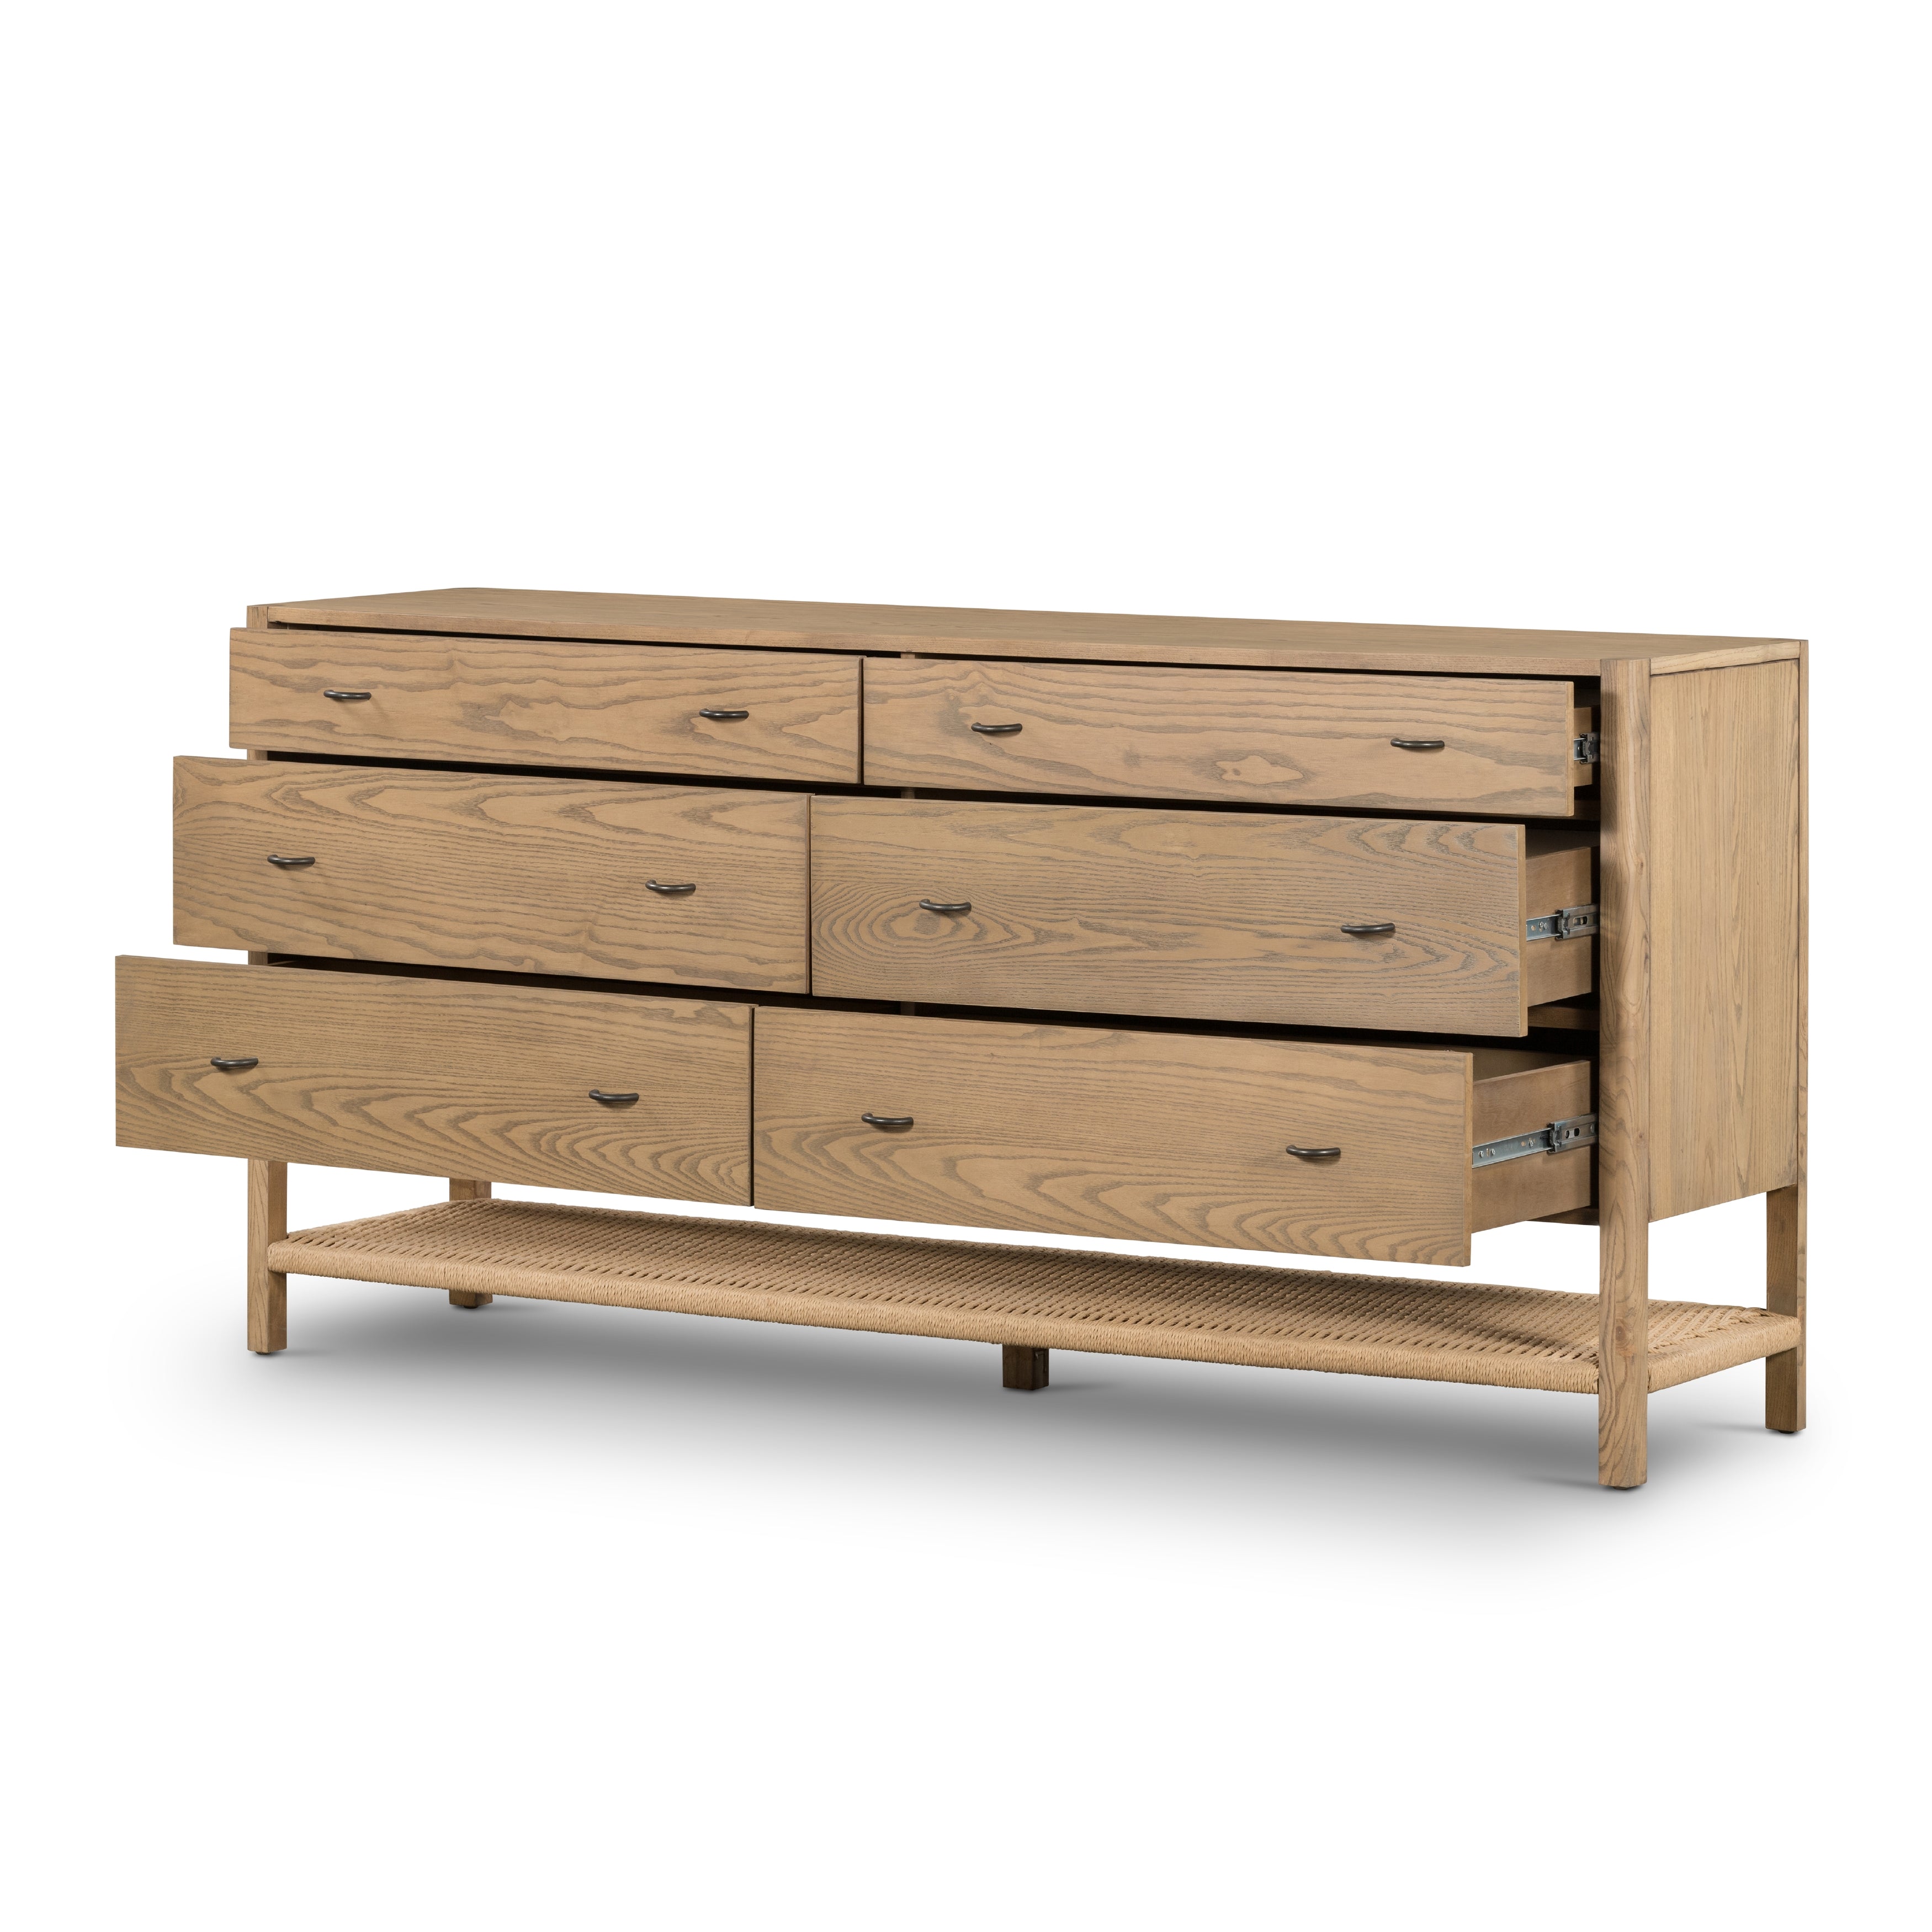 Simple yet refined, the Zuma Dune Ash 6 Drawer Dresser is a danish design-influenced dresser that is made from solid ash, with iron hardware finished in sleek gunmetal. Amethyst Home provides interior design services, furniture, rugs, and lighting in the Calabasas metro area.